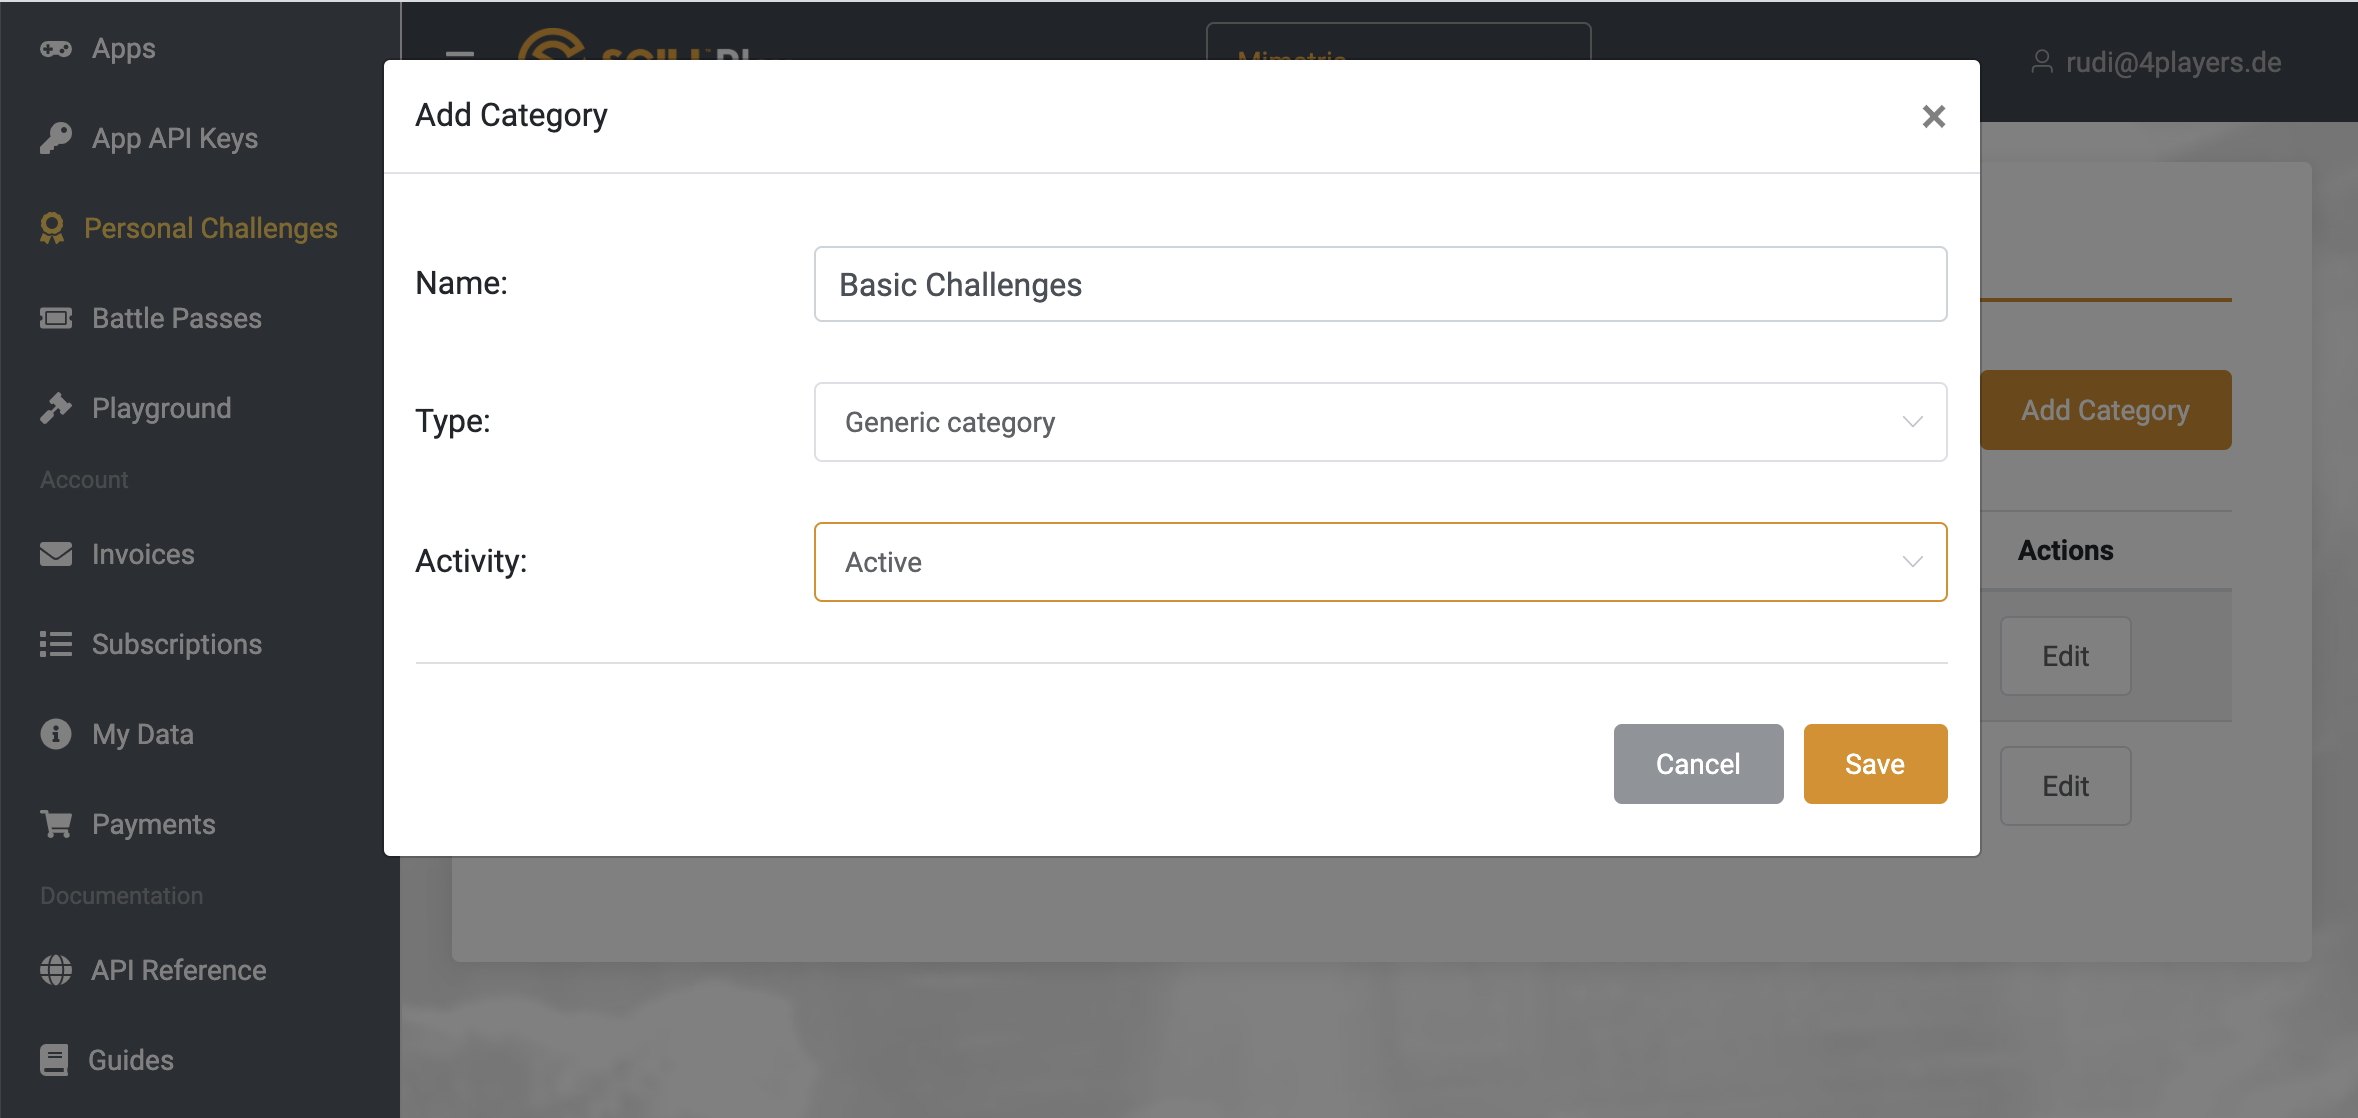 Adding Basic Challenges category